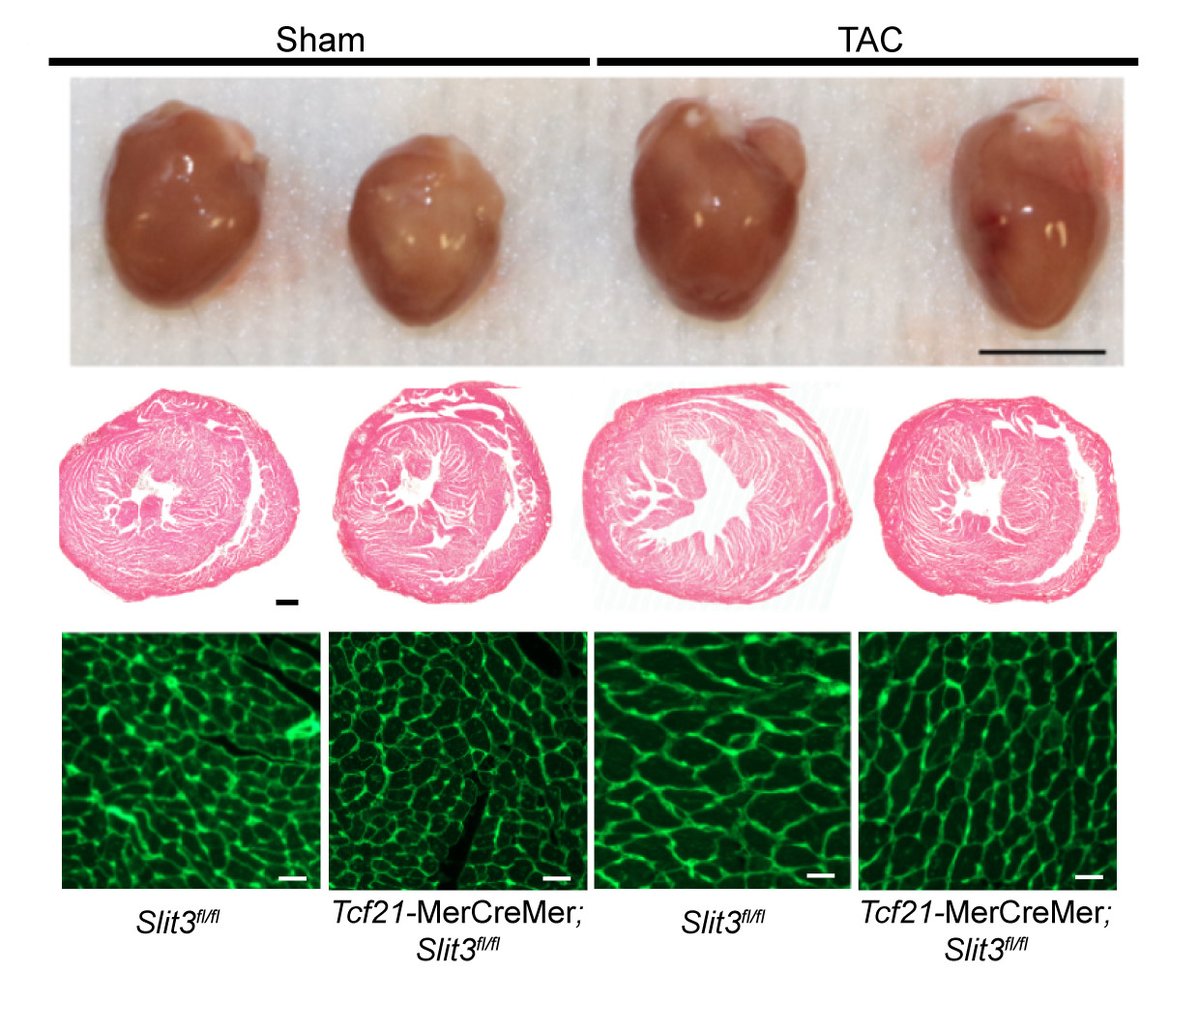 Liu & colleagues found #SLIT3 can directly stimulate #cardiomyocyte #hypertrophy via the #ROBO1 receptor. Learn more about this novel cardiac #stromal cell-cardiomyocyte axis which causes adverse remodeling at ahajournals.org/doi/10.1161/CI…